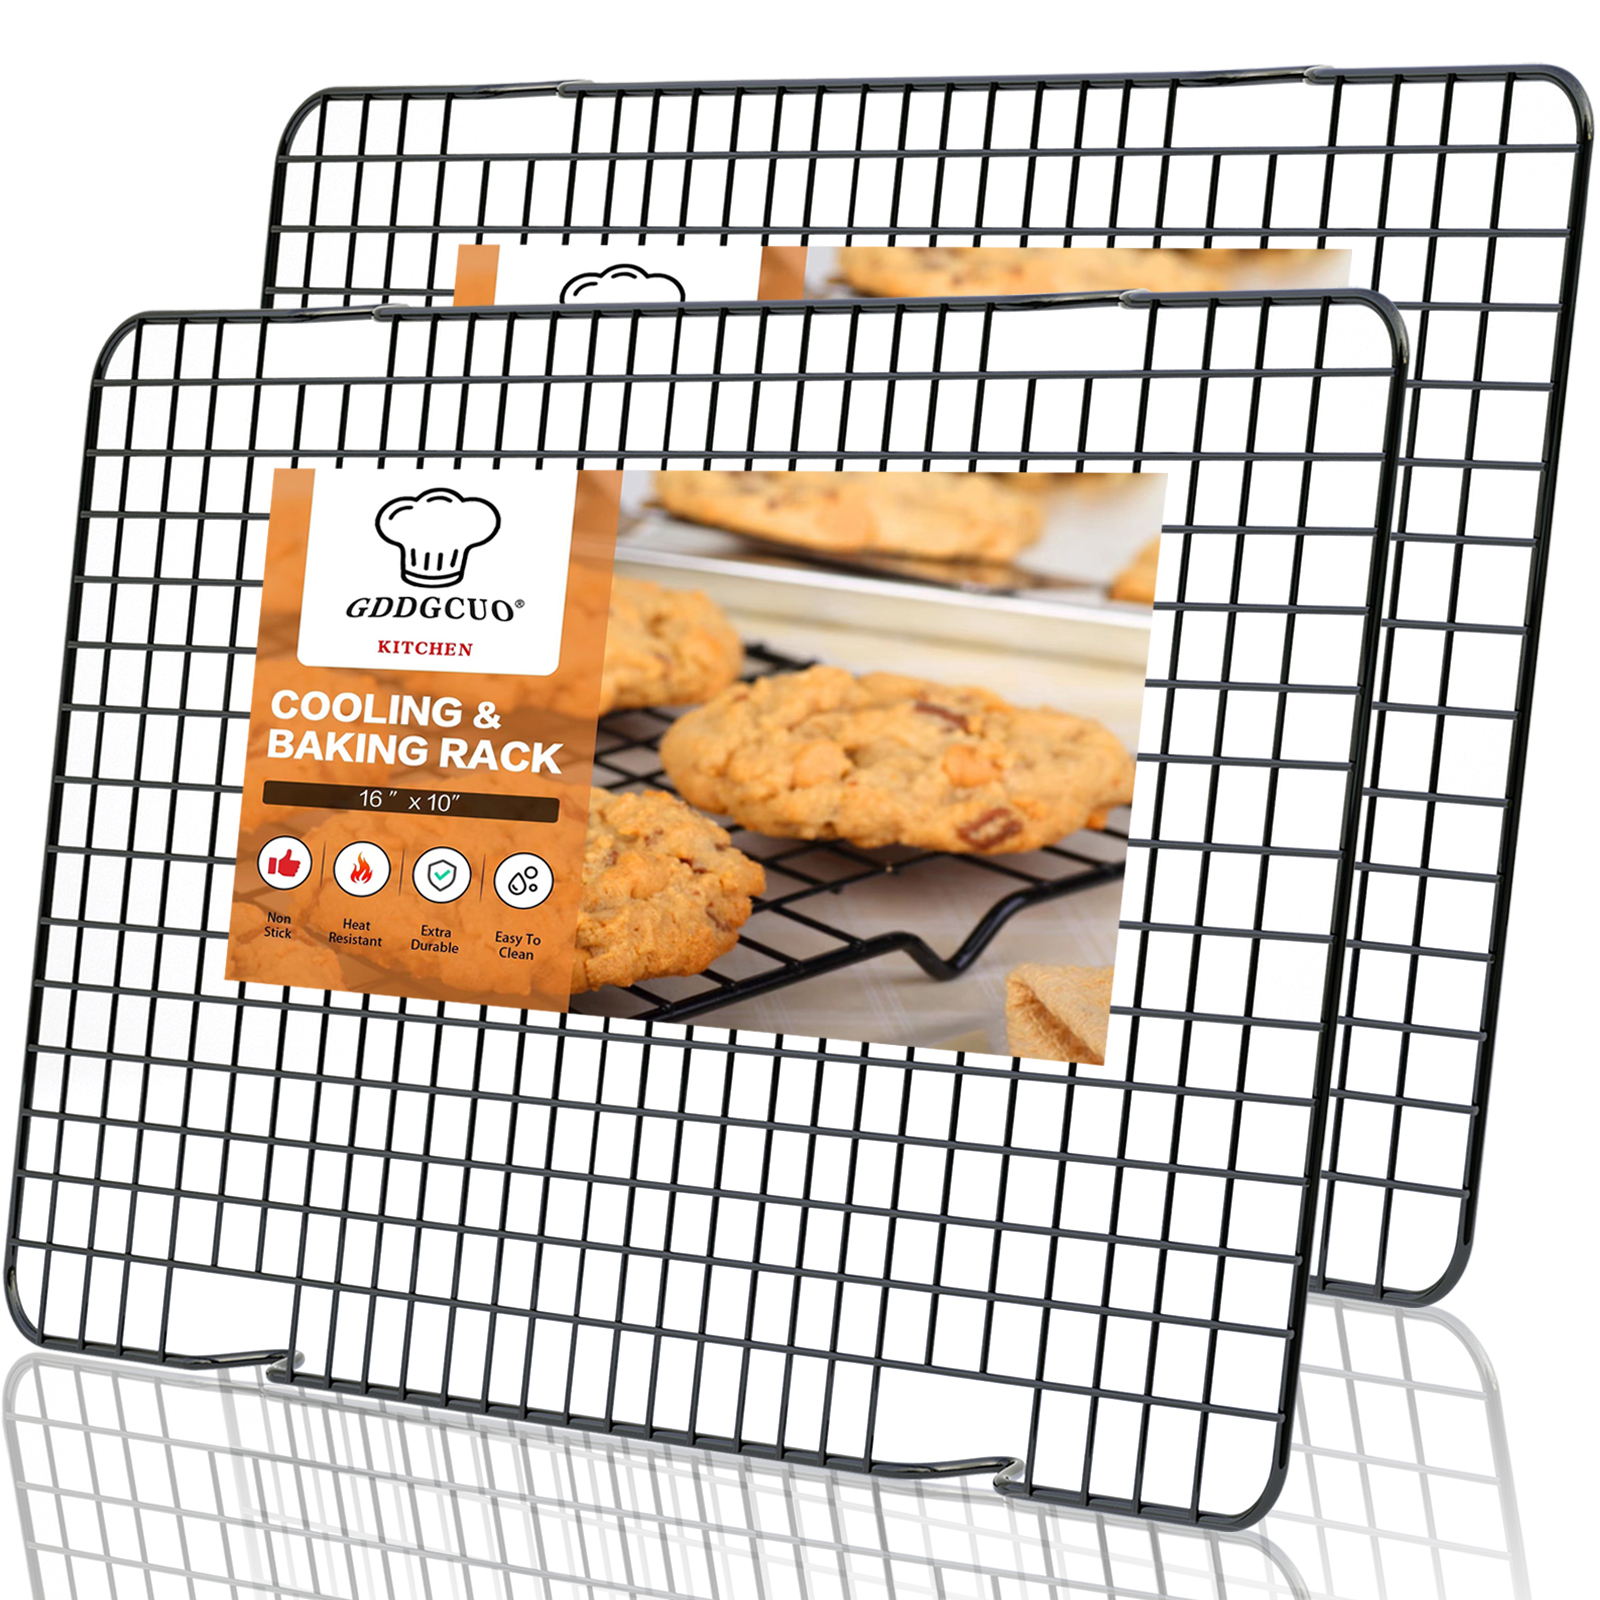 2pcs Non-Stick Stainless Steel Cooling Rack for Baking and Cooking - Perfect for Mooncakes, Bread, Cakes, Cookies, and More